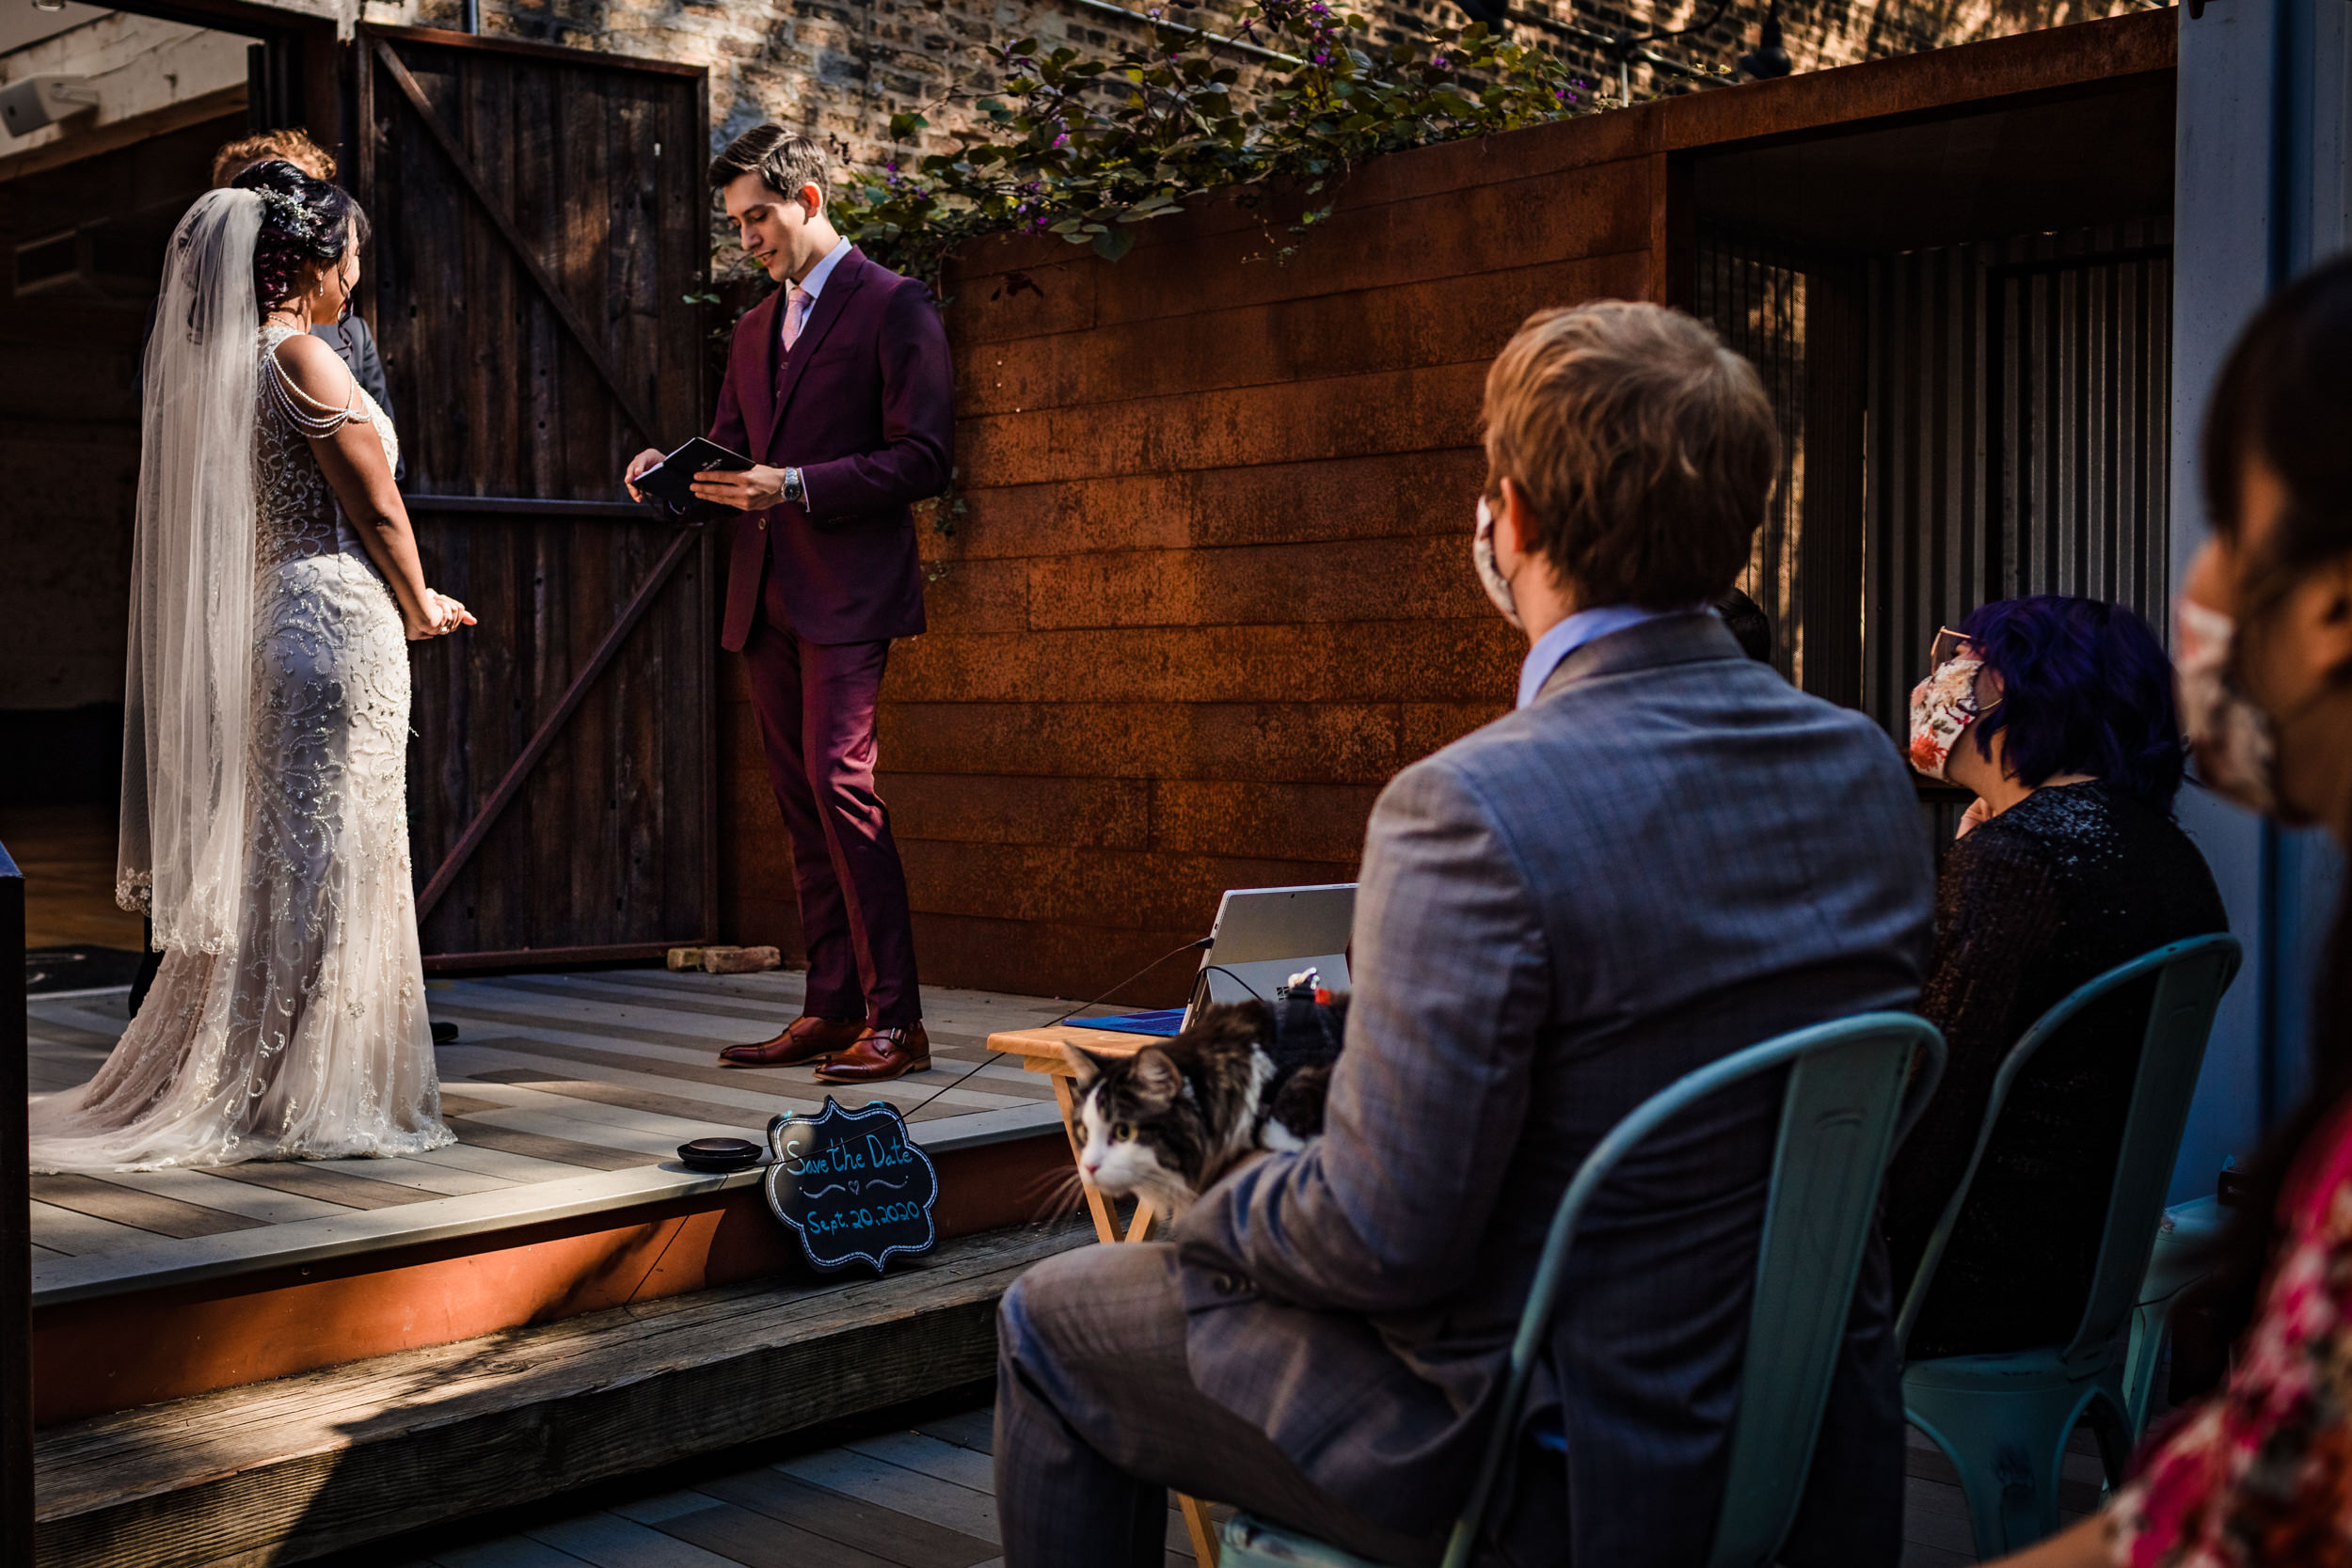 Guests watch a ceremony during a wedding at the Joinery.